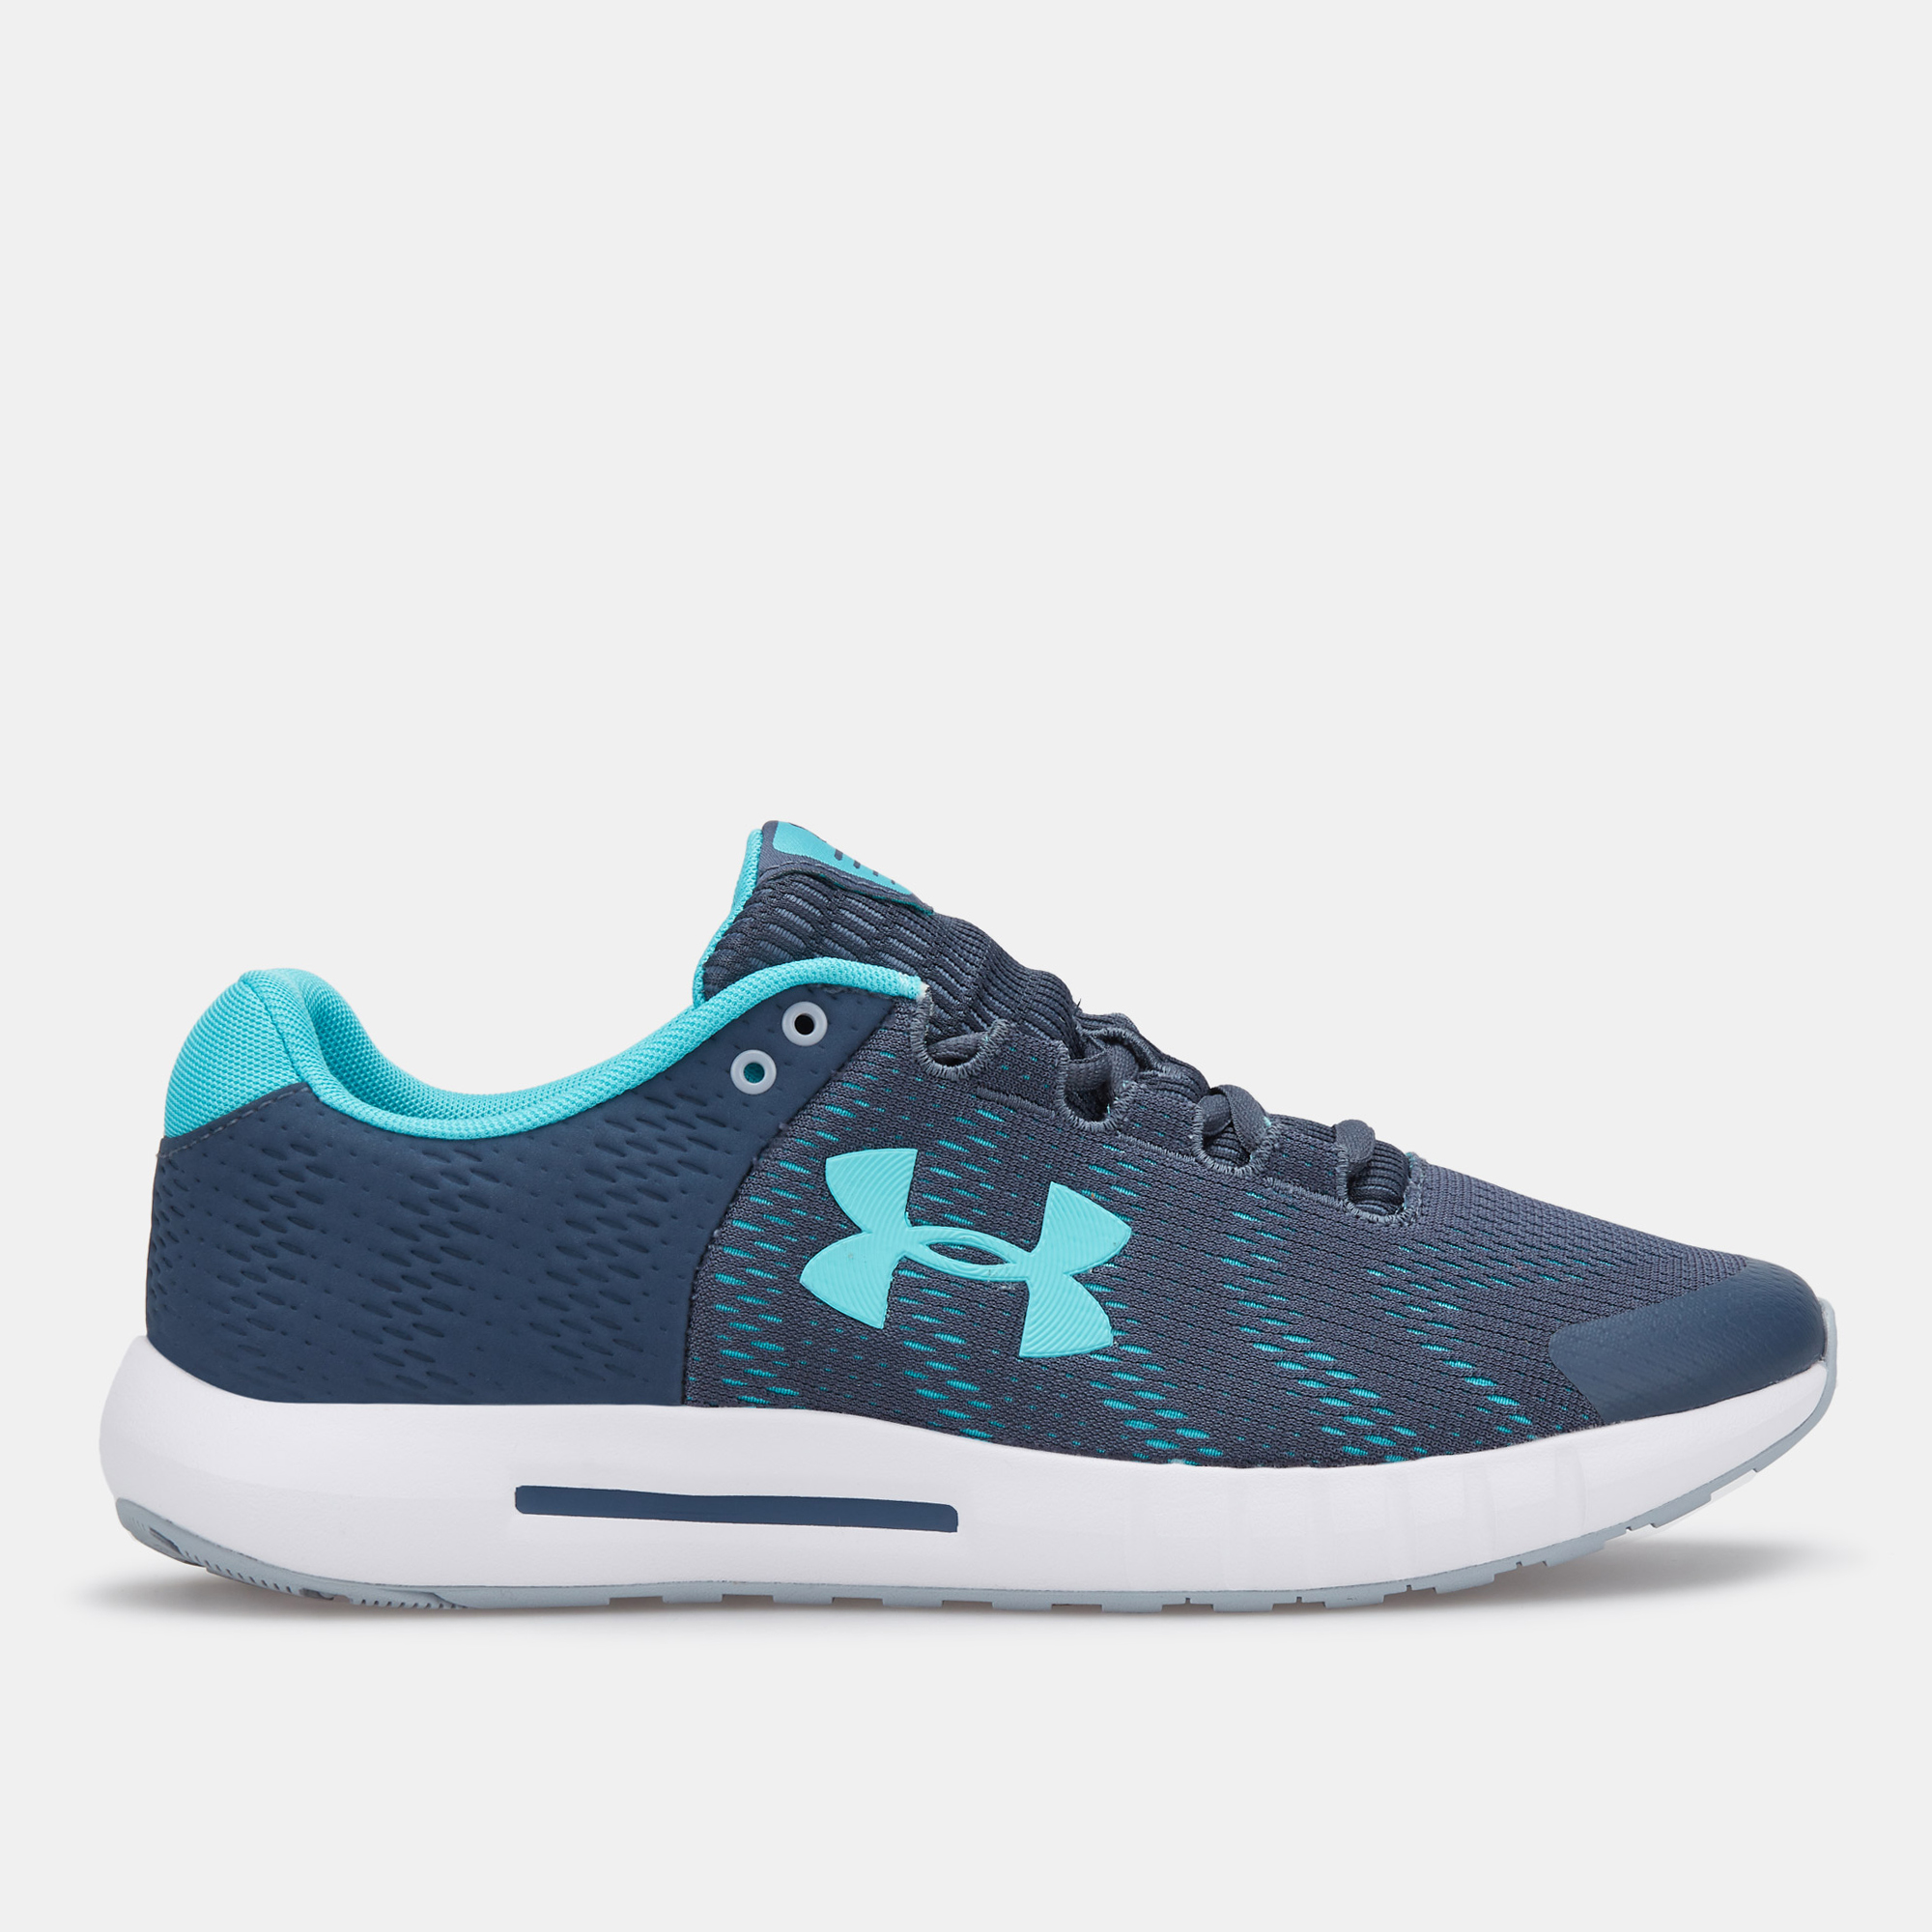 Under Armour Women's Micro G Pursuit BP Running Shoes | Running Shoes ...